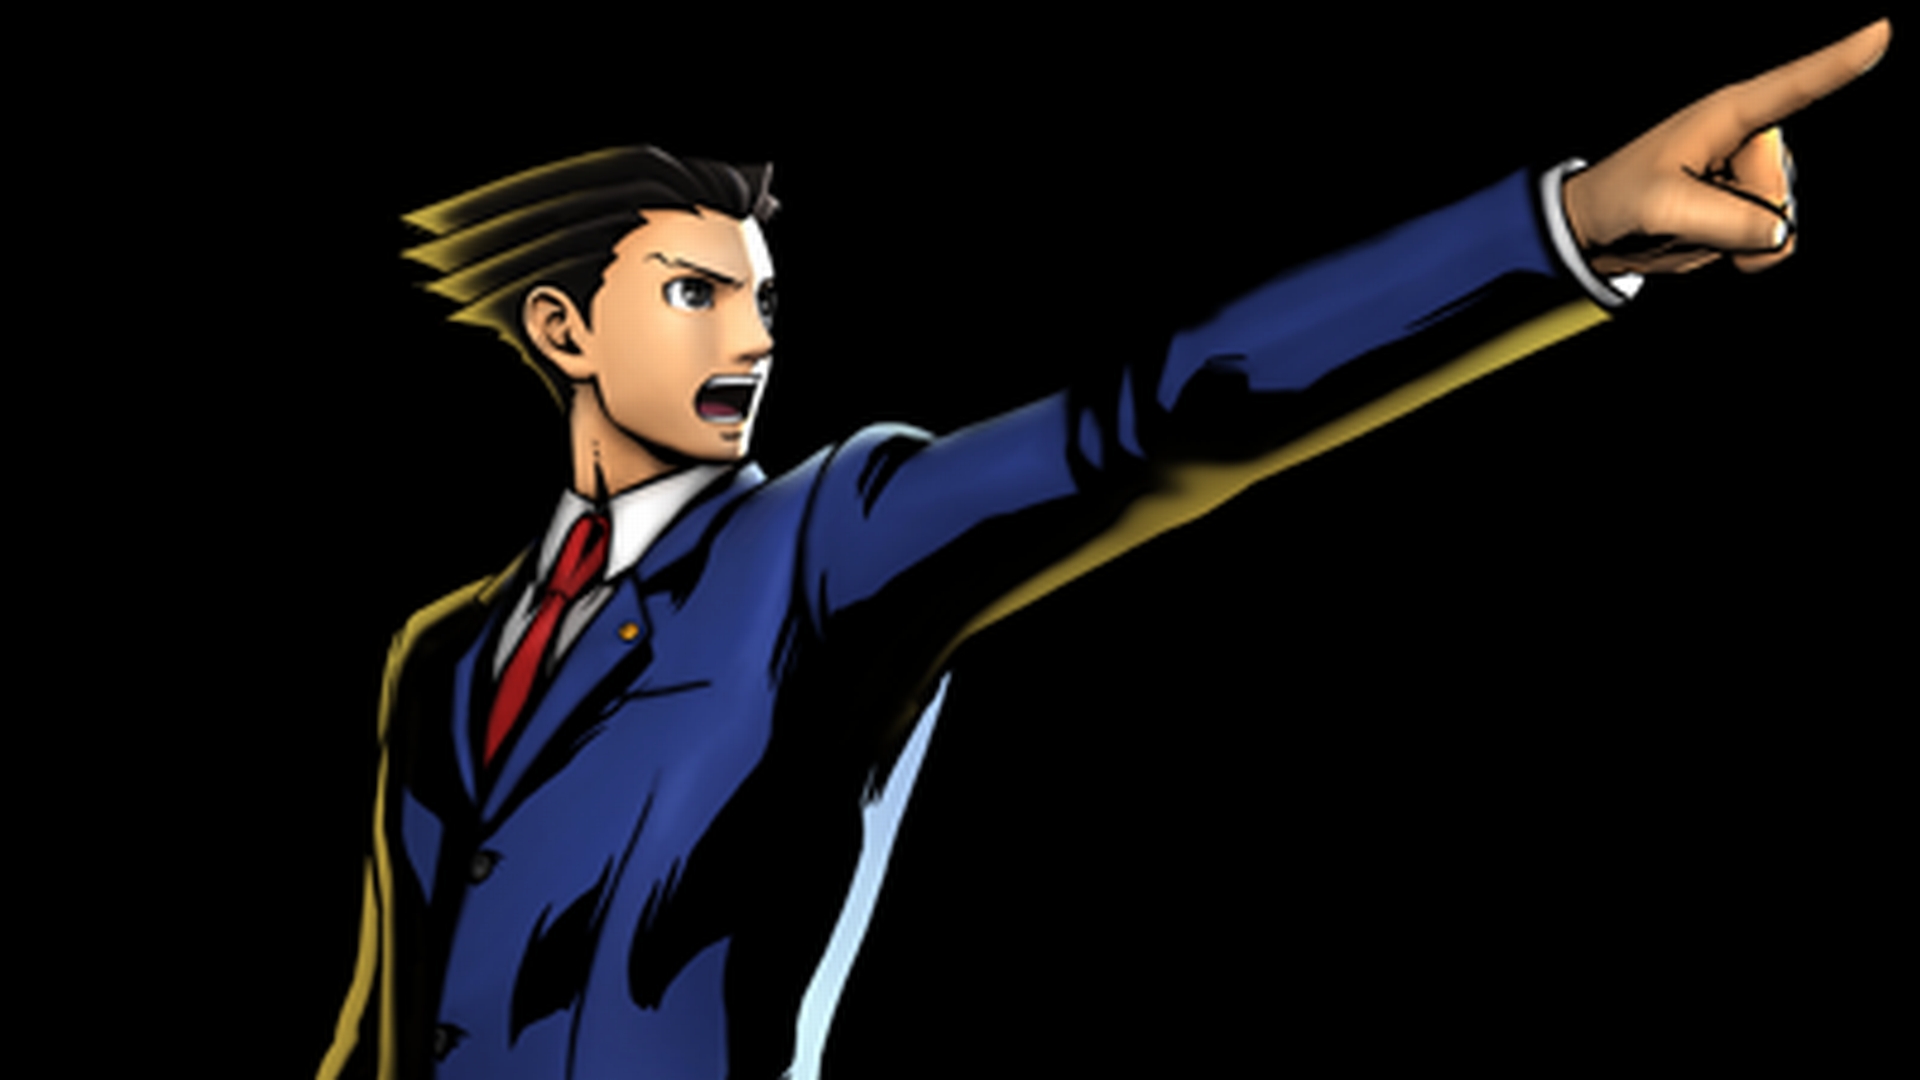 Phoenix Wright: Ace Attorney video game wallpaper with captivating courtroom scene.